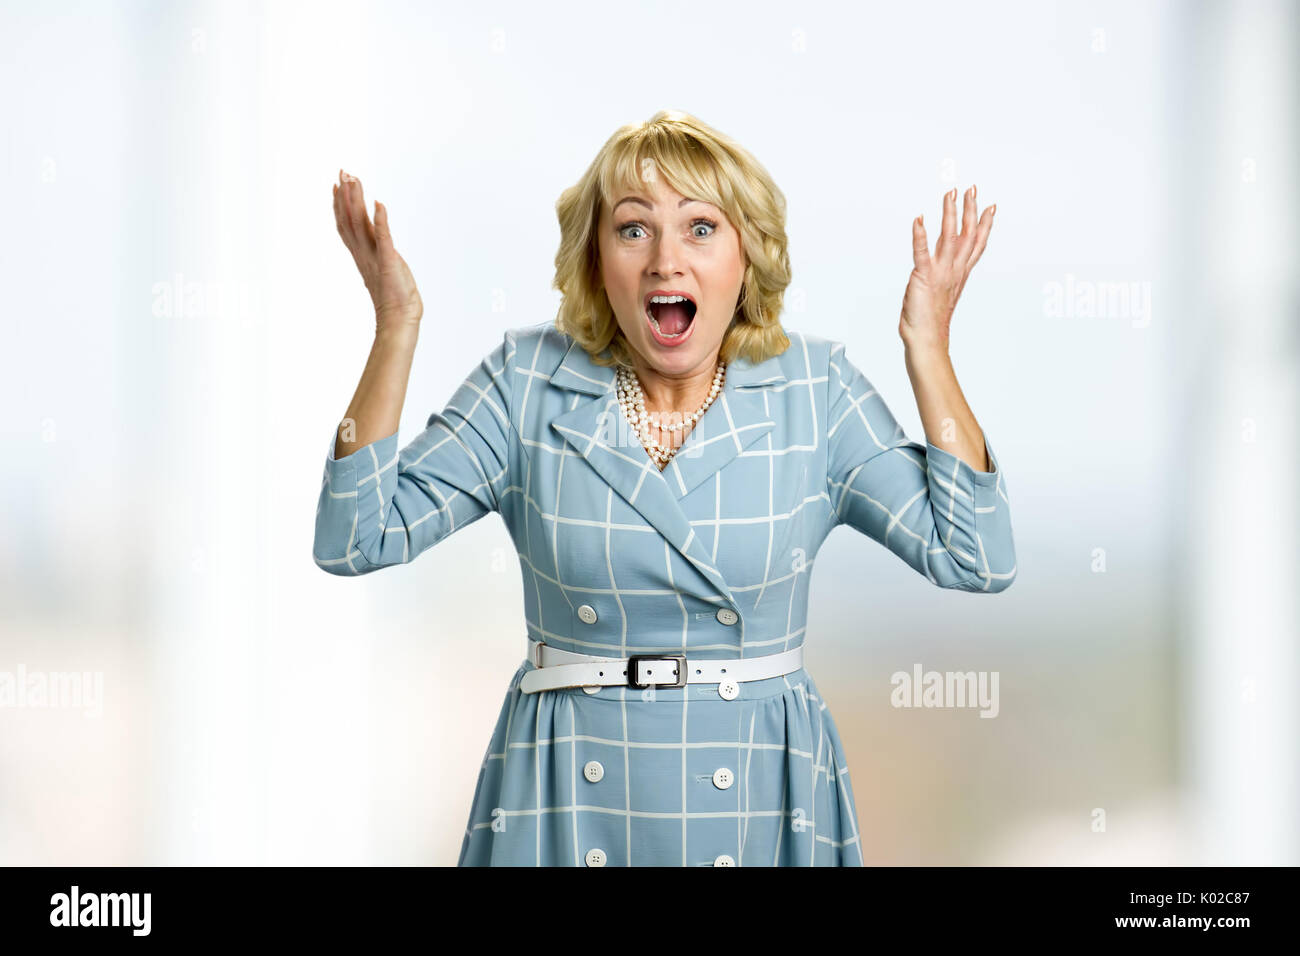 Surprised mature women raised hands. Adult woman with open mouth and eyes raised hands in confusion. Facial expression and body language. Stock Photo